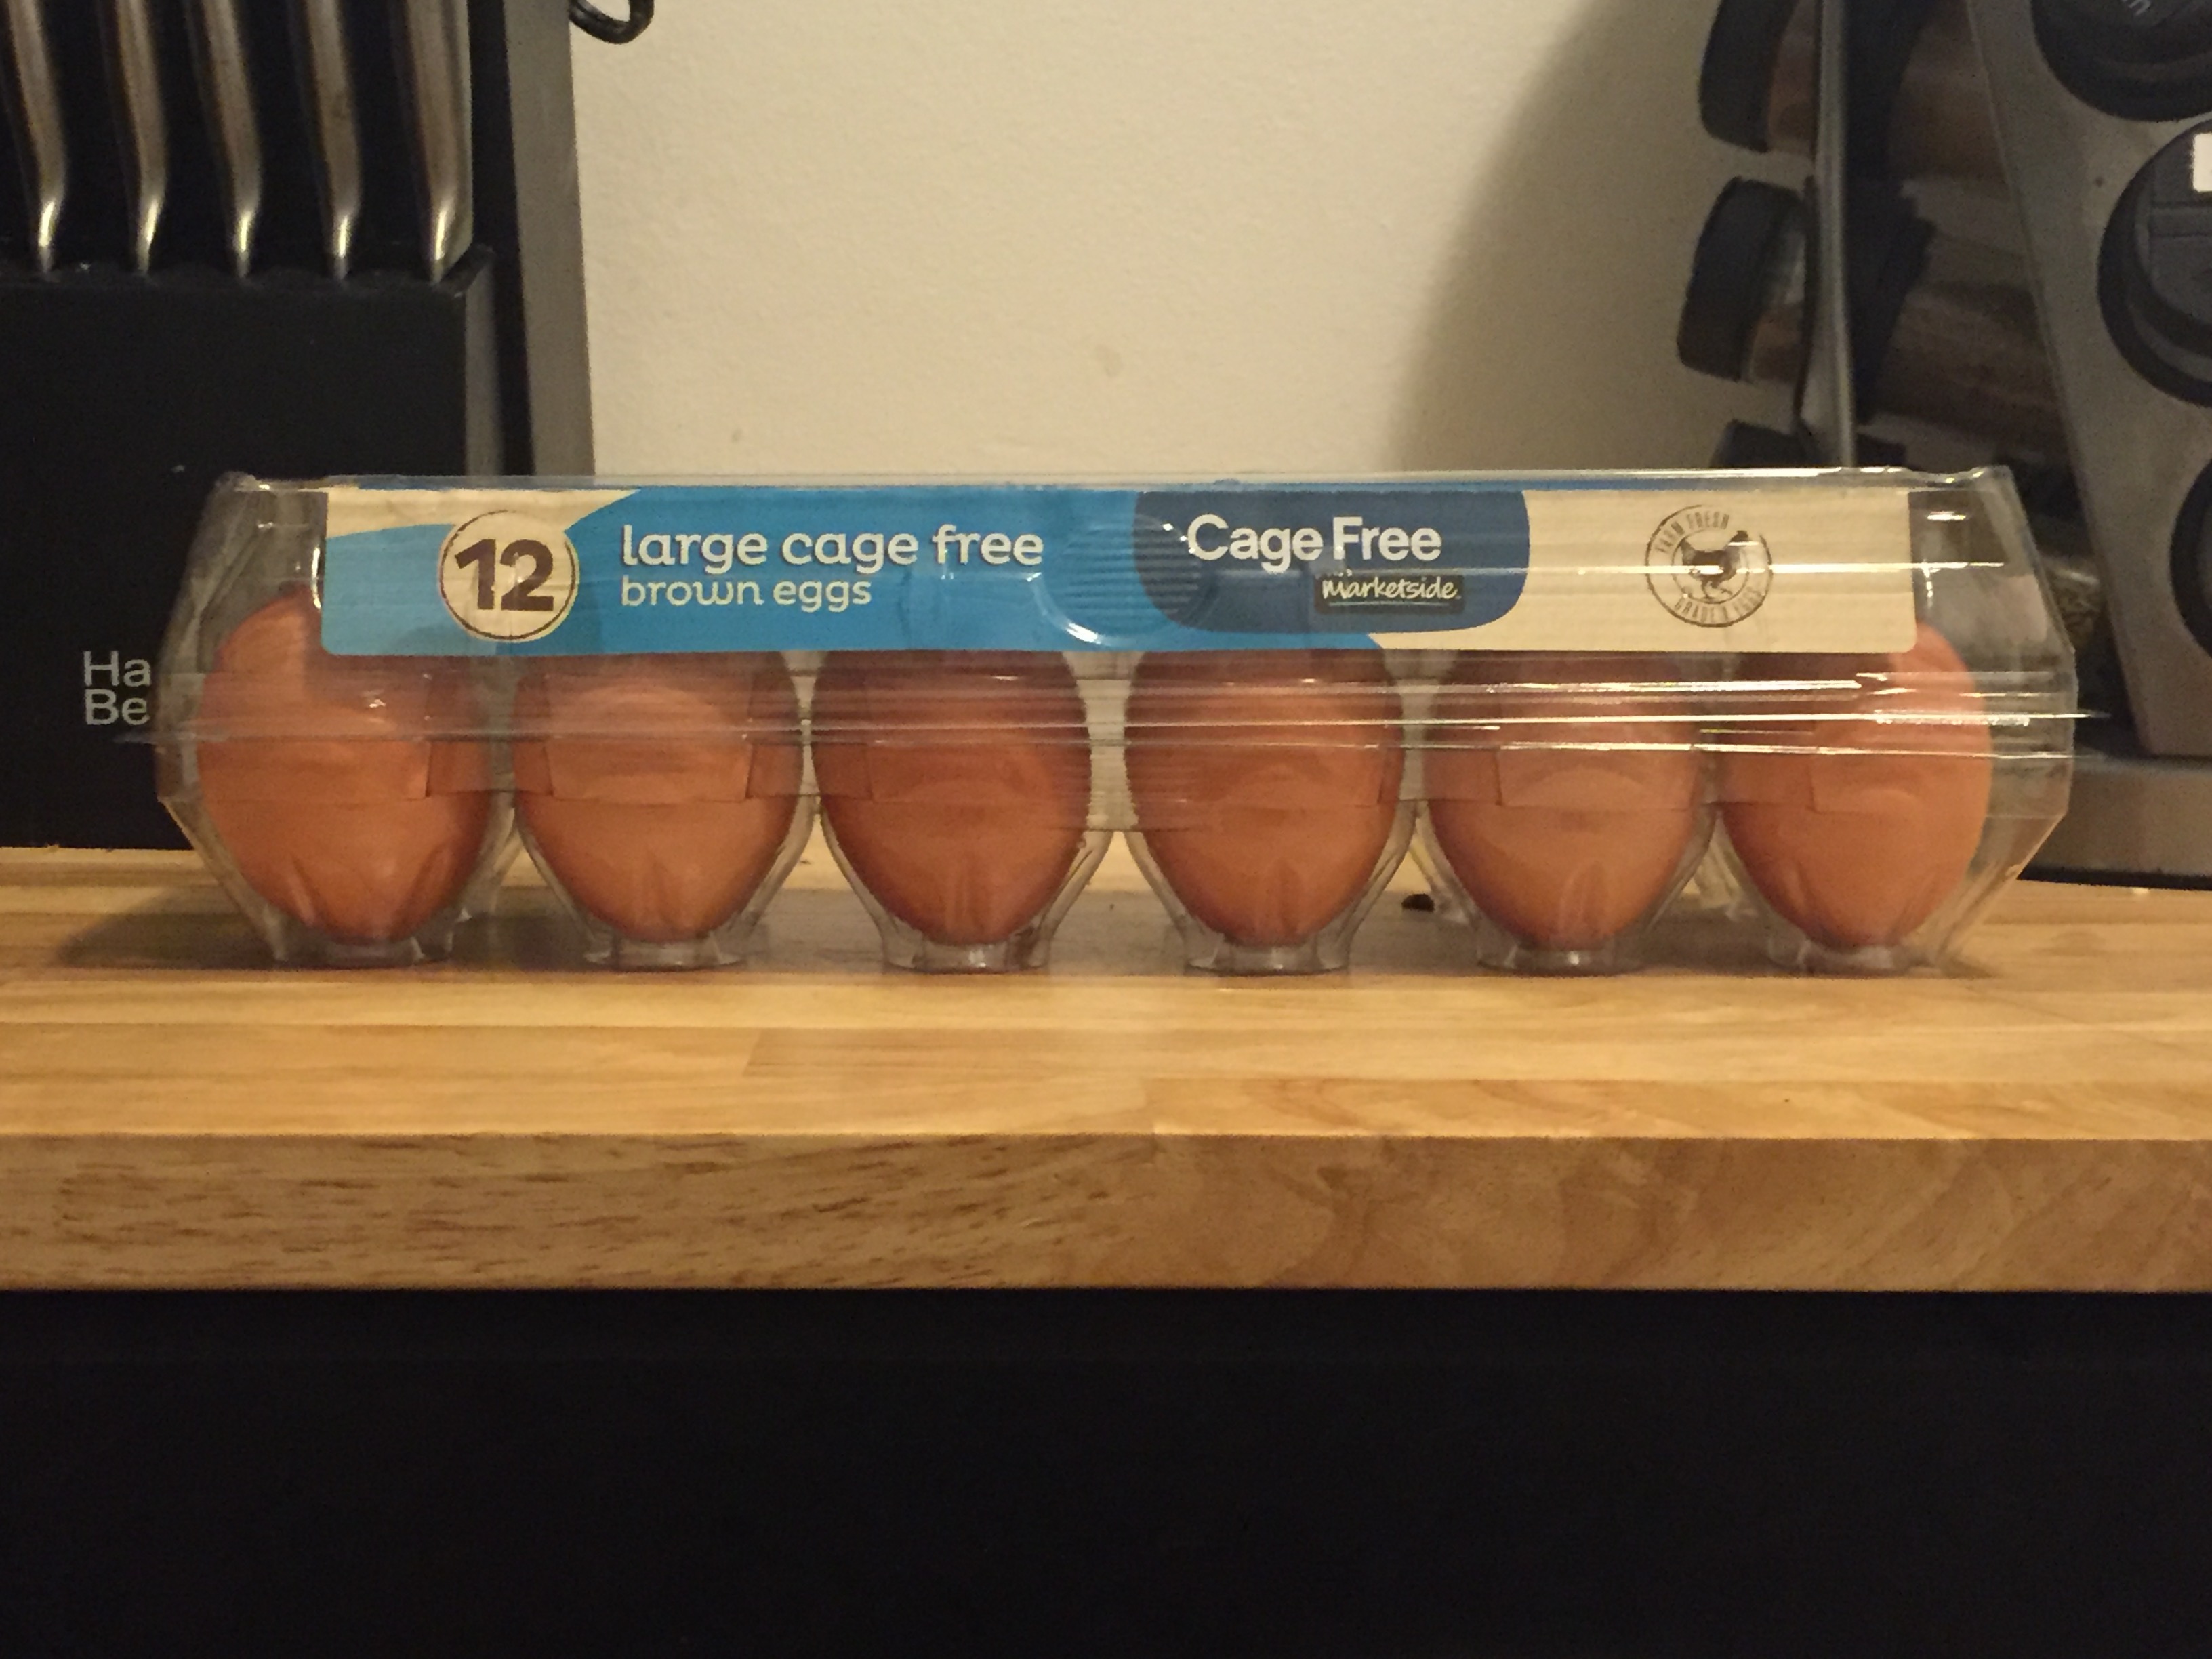 More restaurants are pledging to use cage-free eggs only.